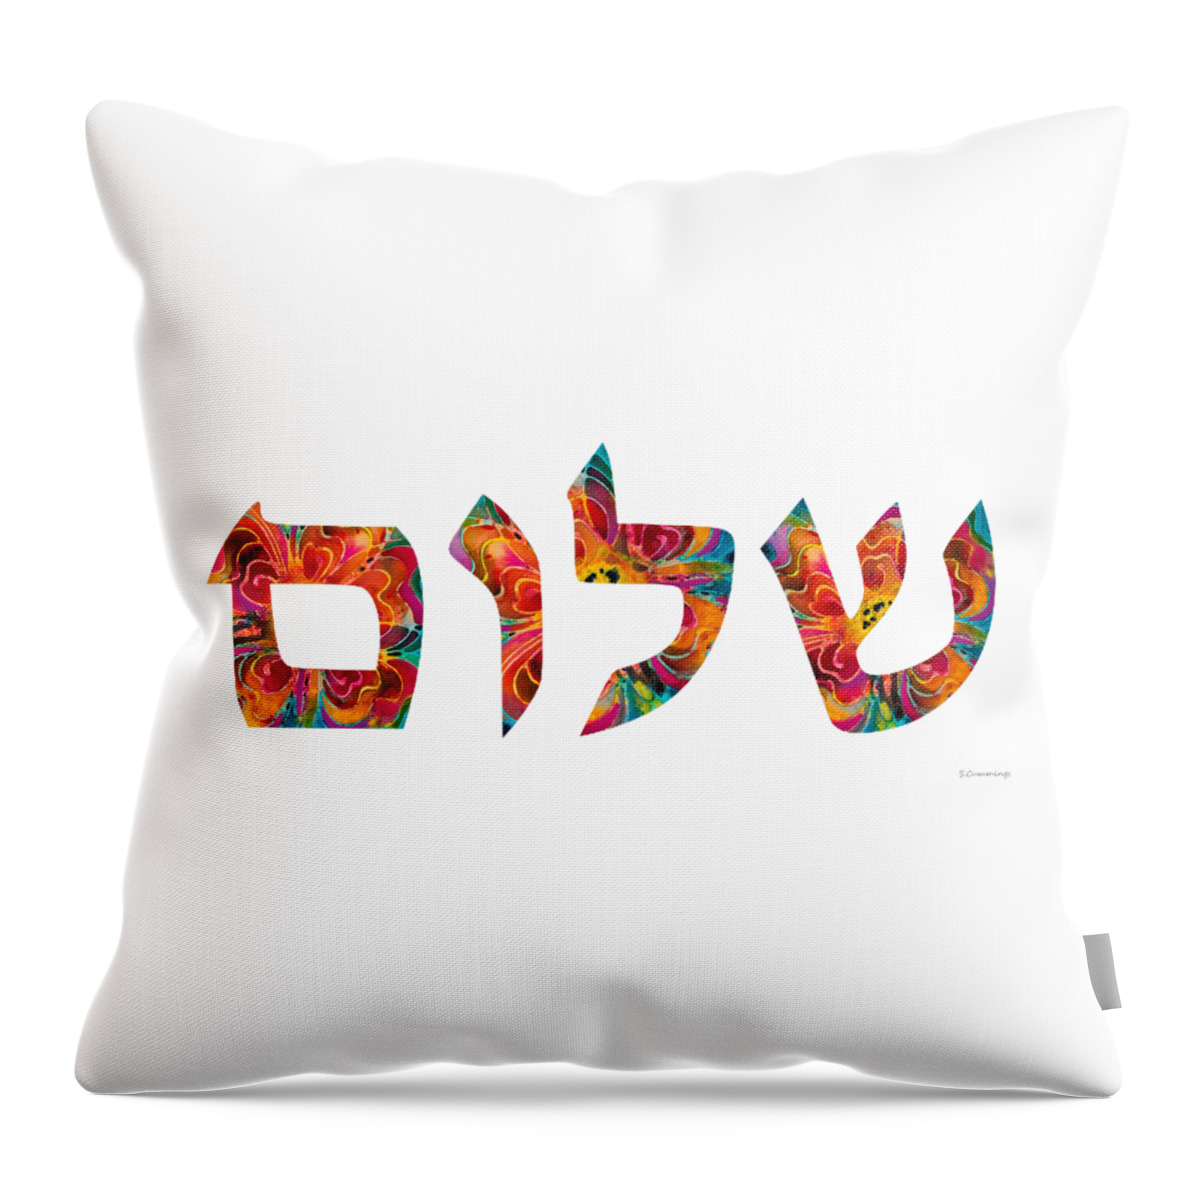 Judaica Throw Pillow featuring the painting Shalom 12 - Jewish Hebrew Peace Letters by Sharon Cummings